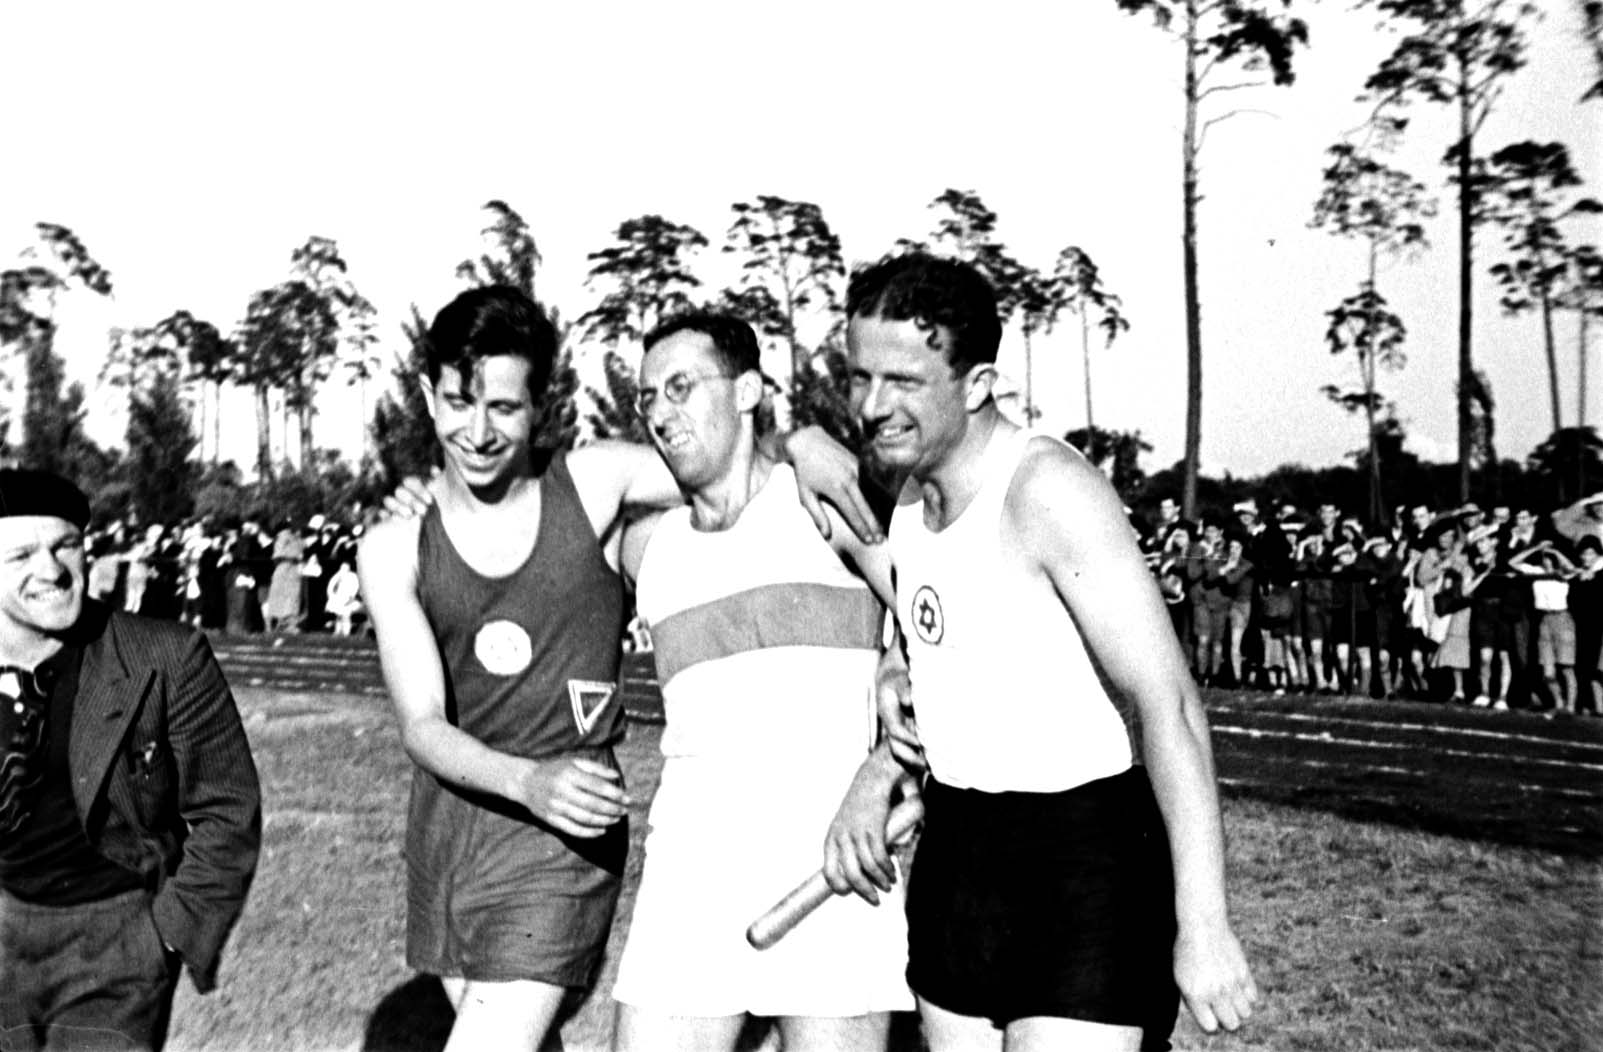 Berlin, Germany, 16/6/1935, Frankenstein, Dreyer and Orgler. Track and field athletes at the Maccabi Berlin International Sports Day